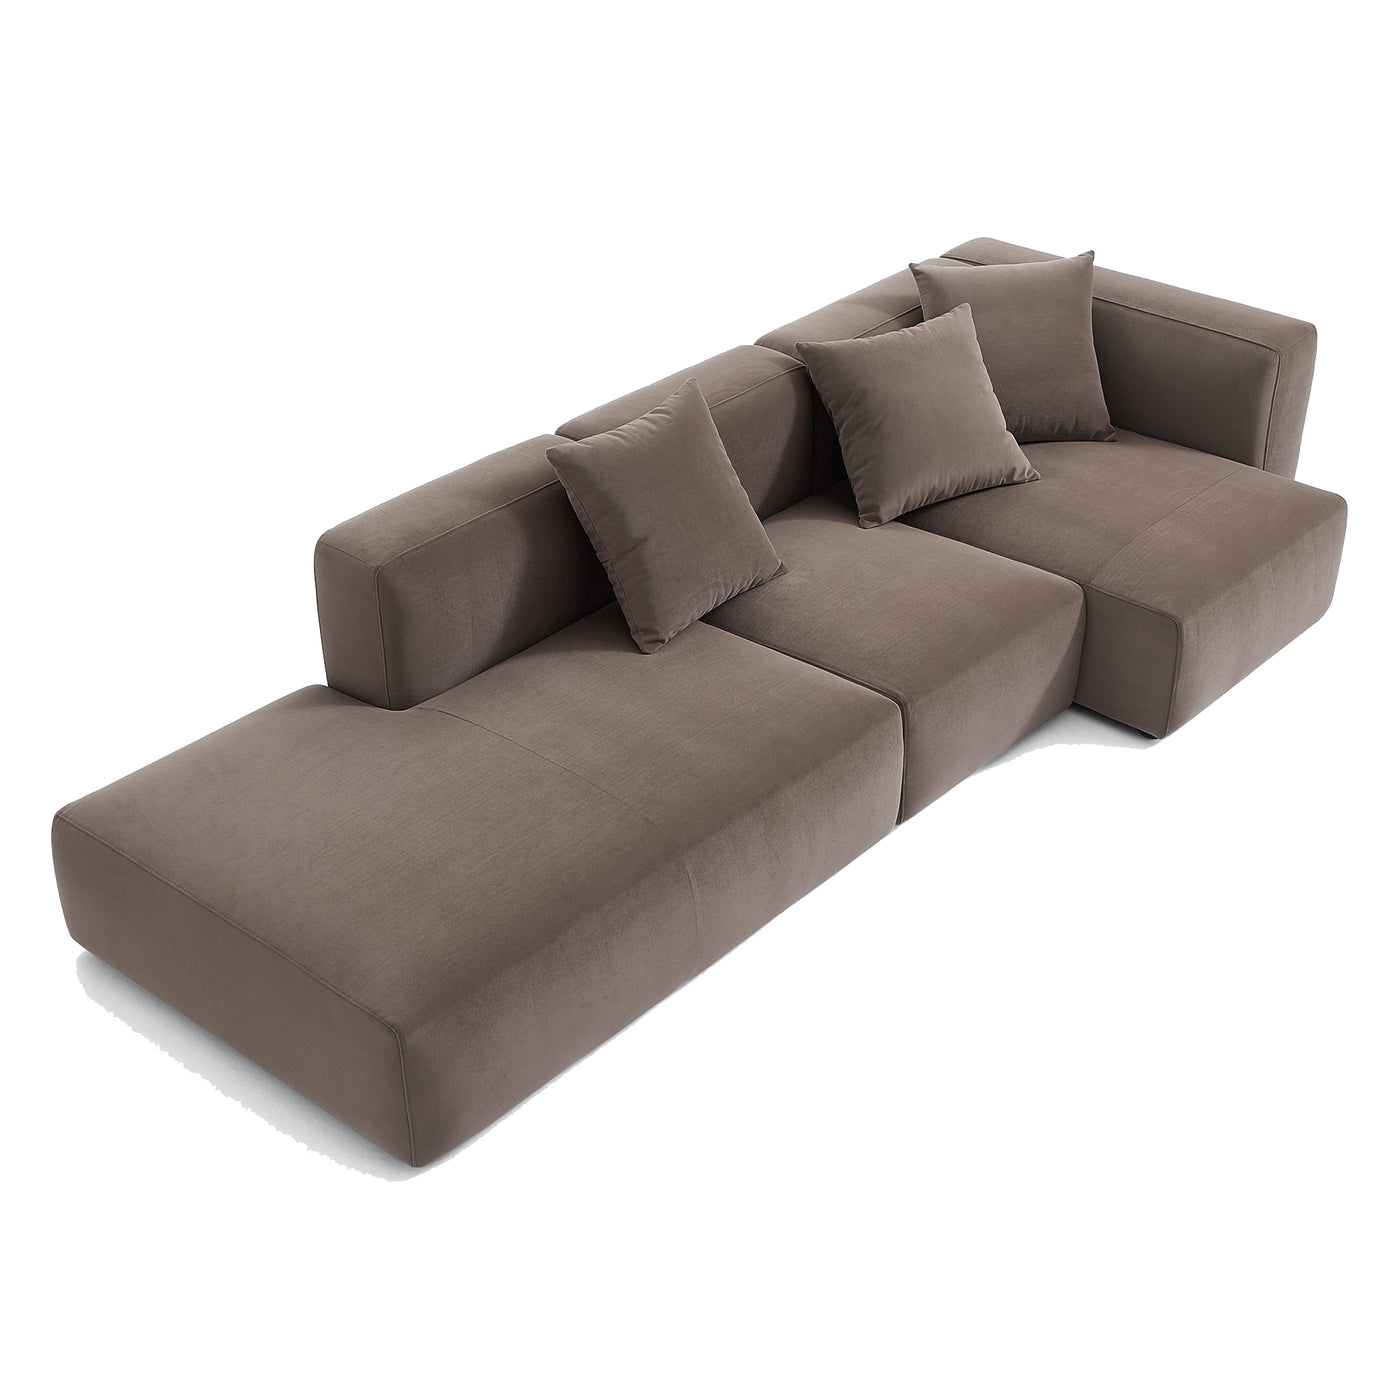 Geometry Minimalist Sectional-Brown-124.0"-Facing Right